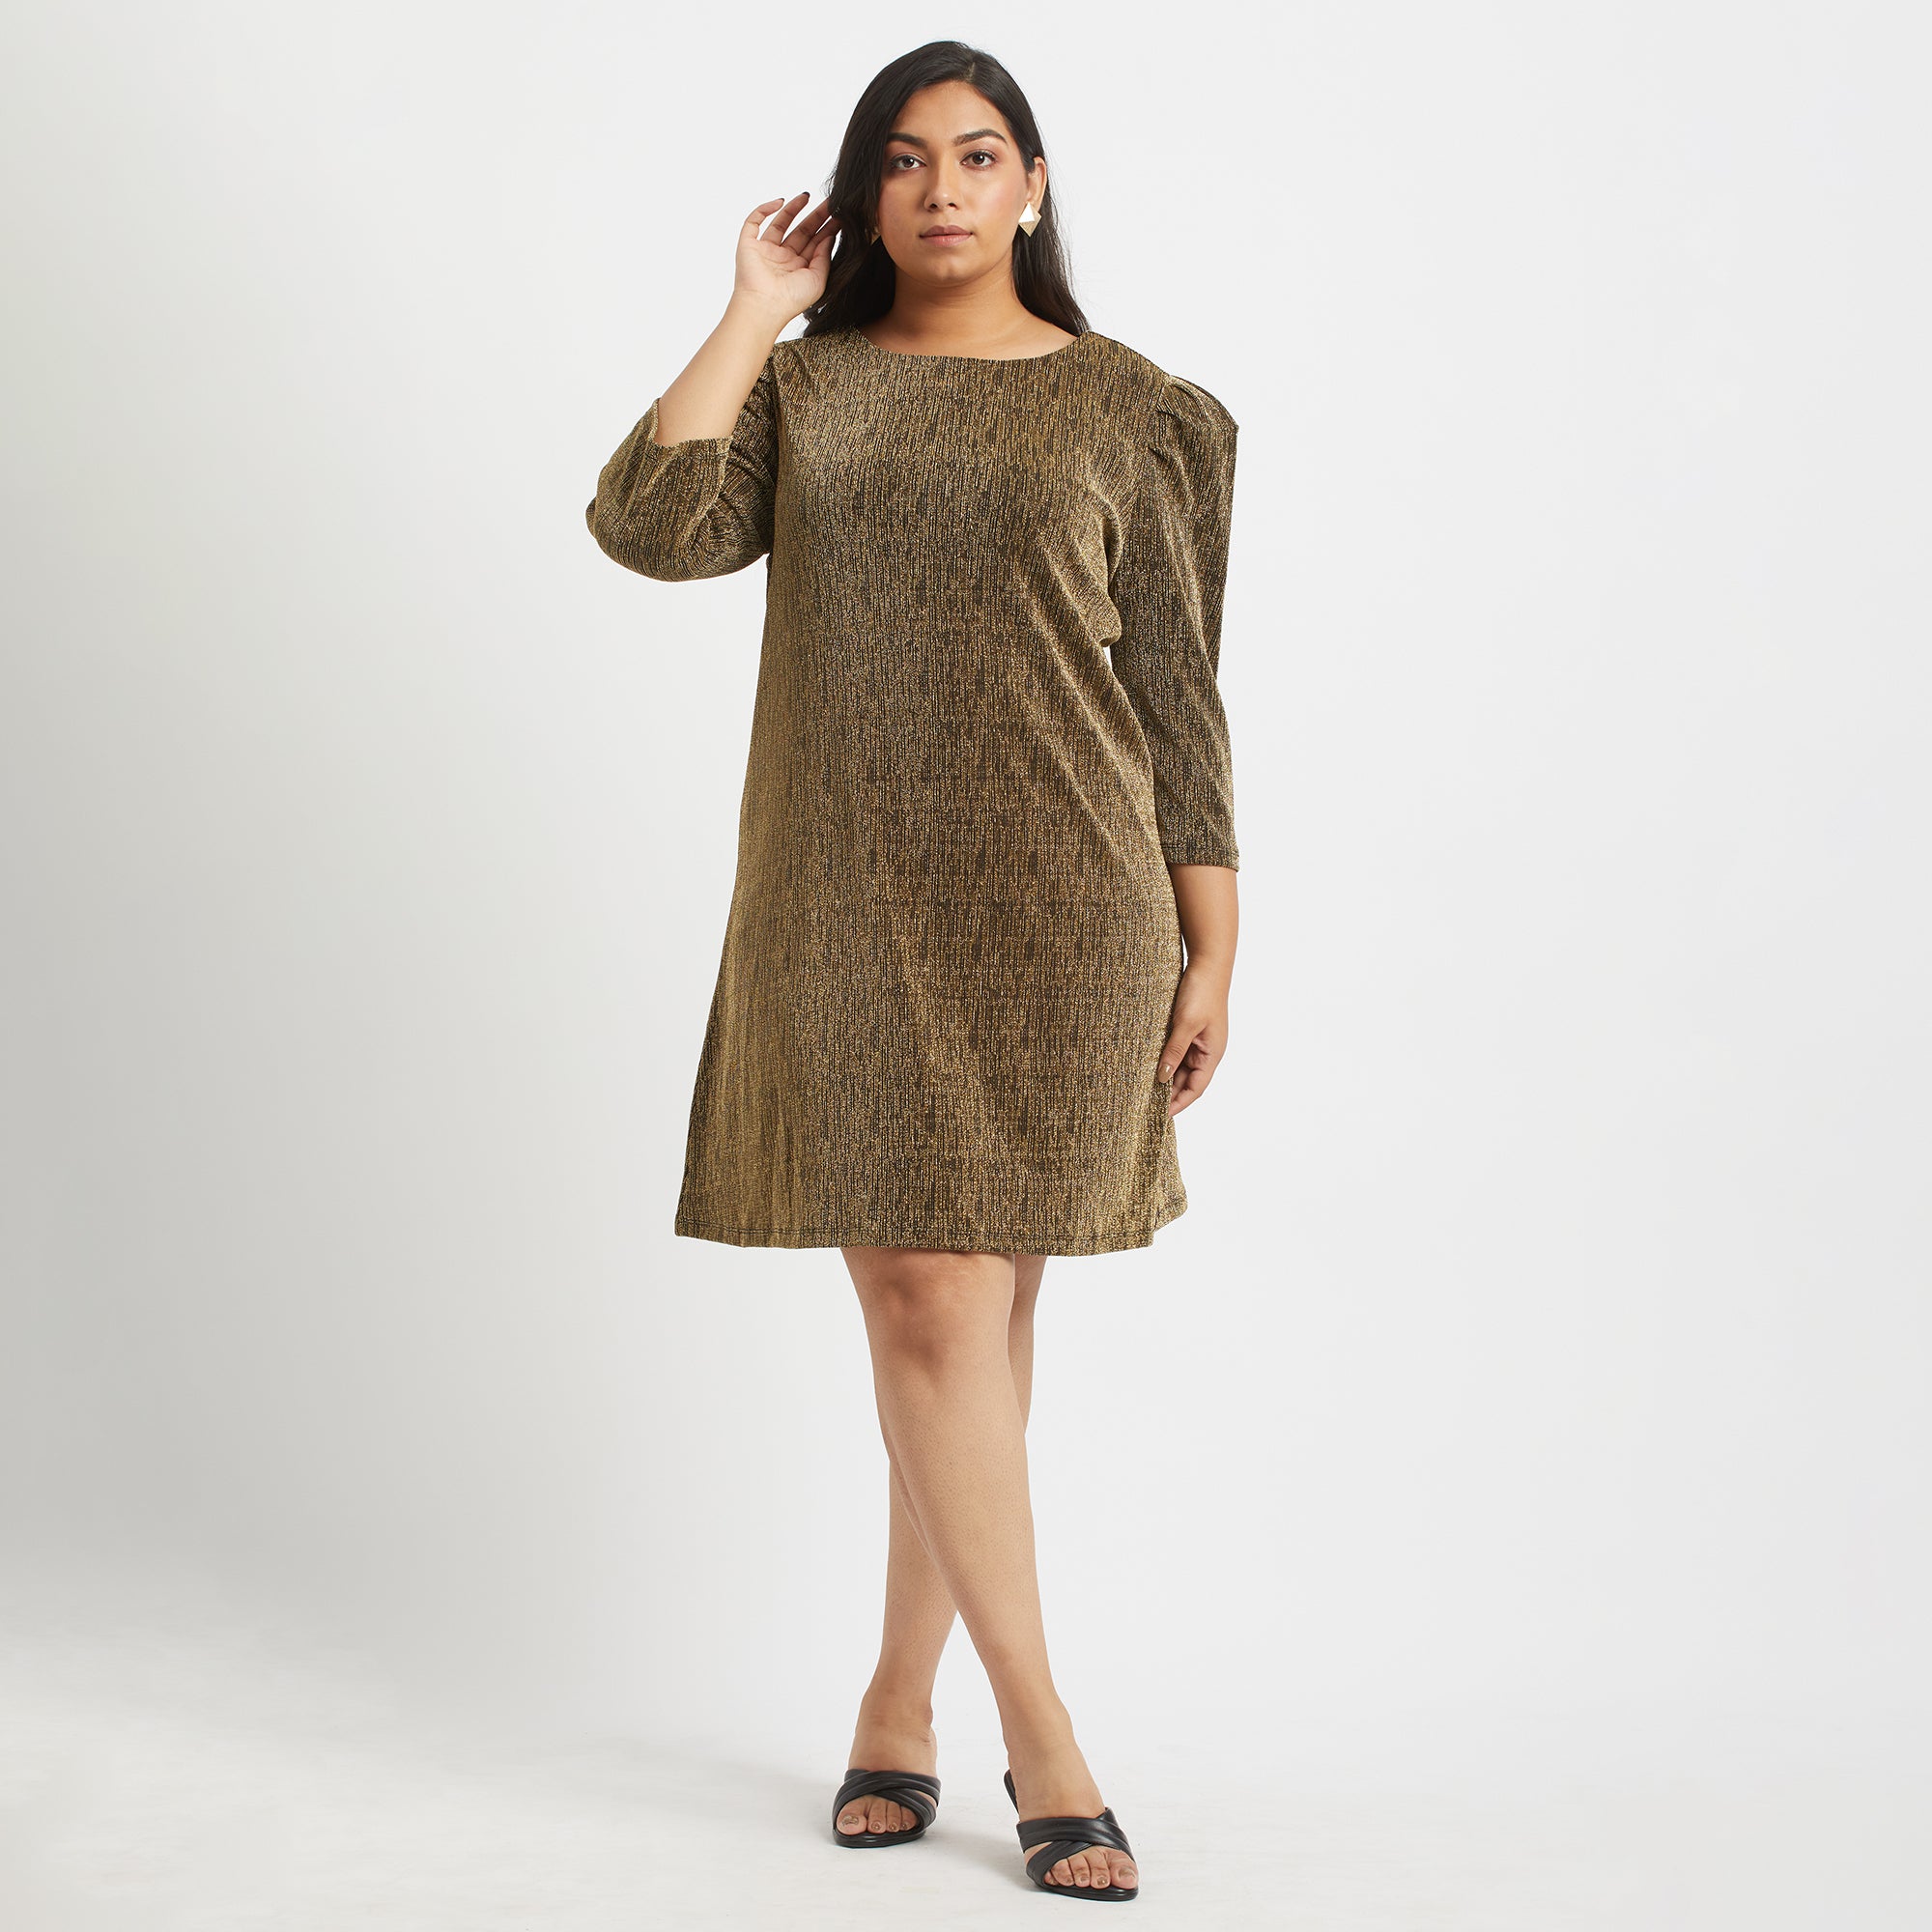 Gilded Puff Sleeve Dress For Plus Size Women